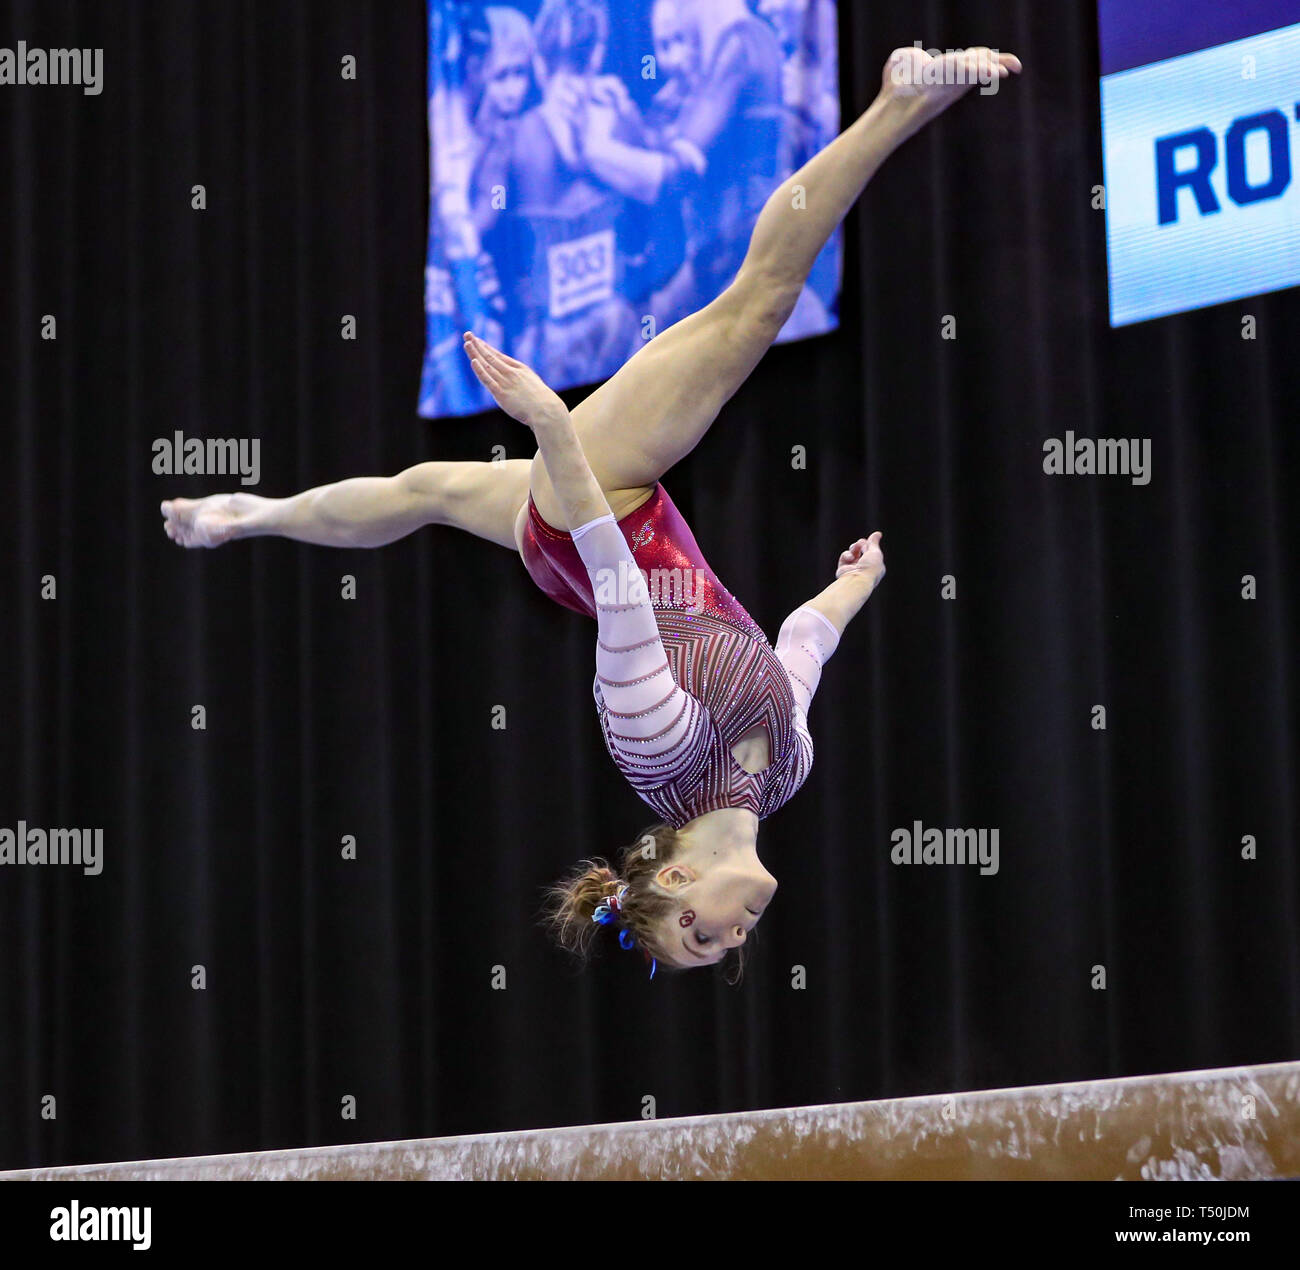 Page 3 - Tumbling Pass High Resolution Stock Photography and Images - Alamy